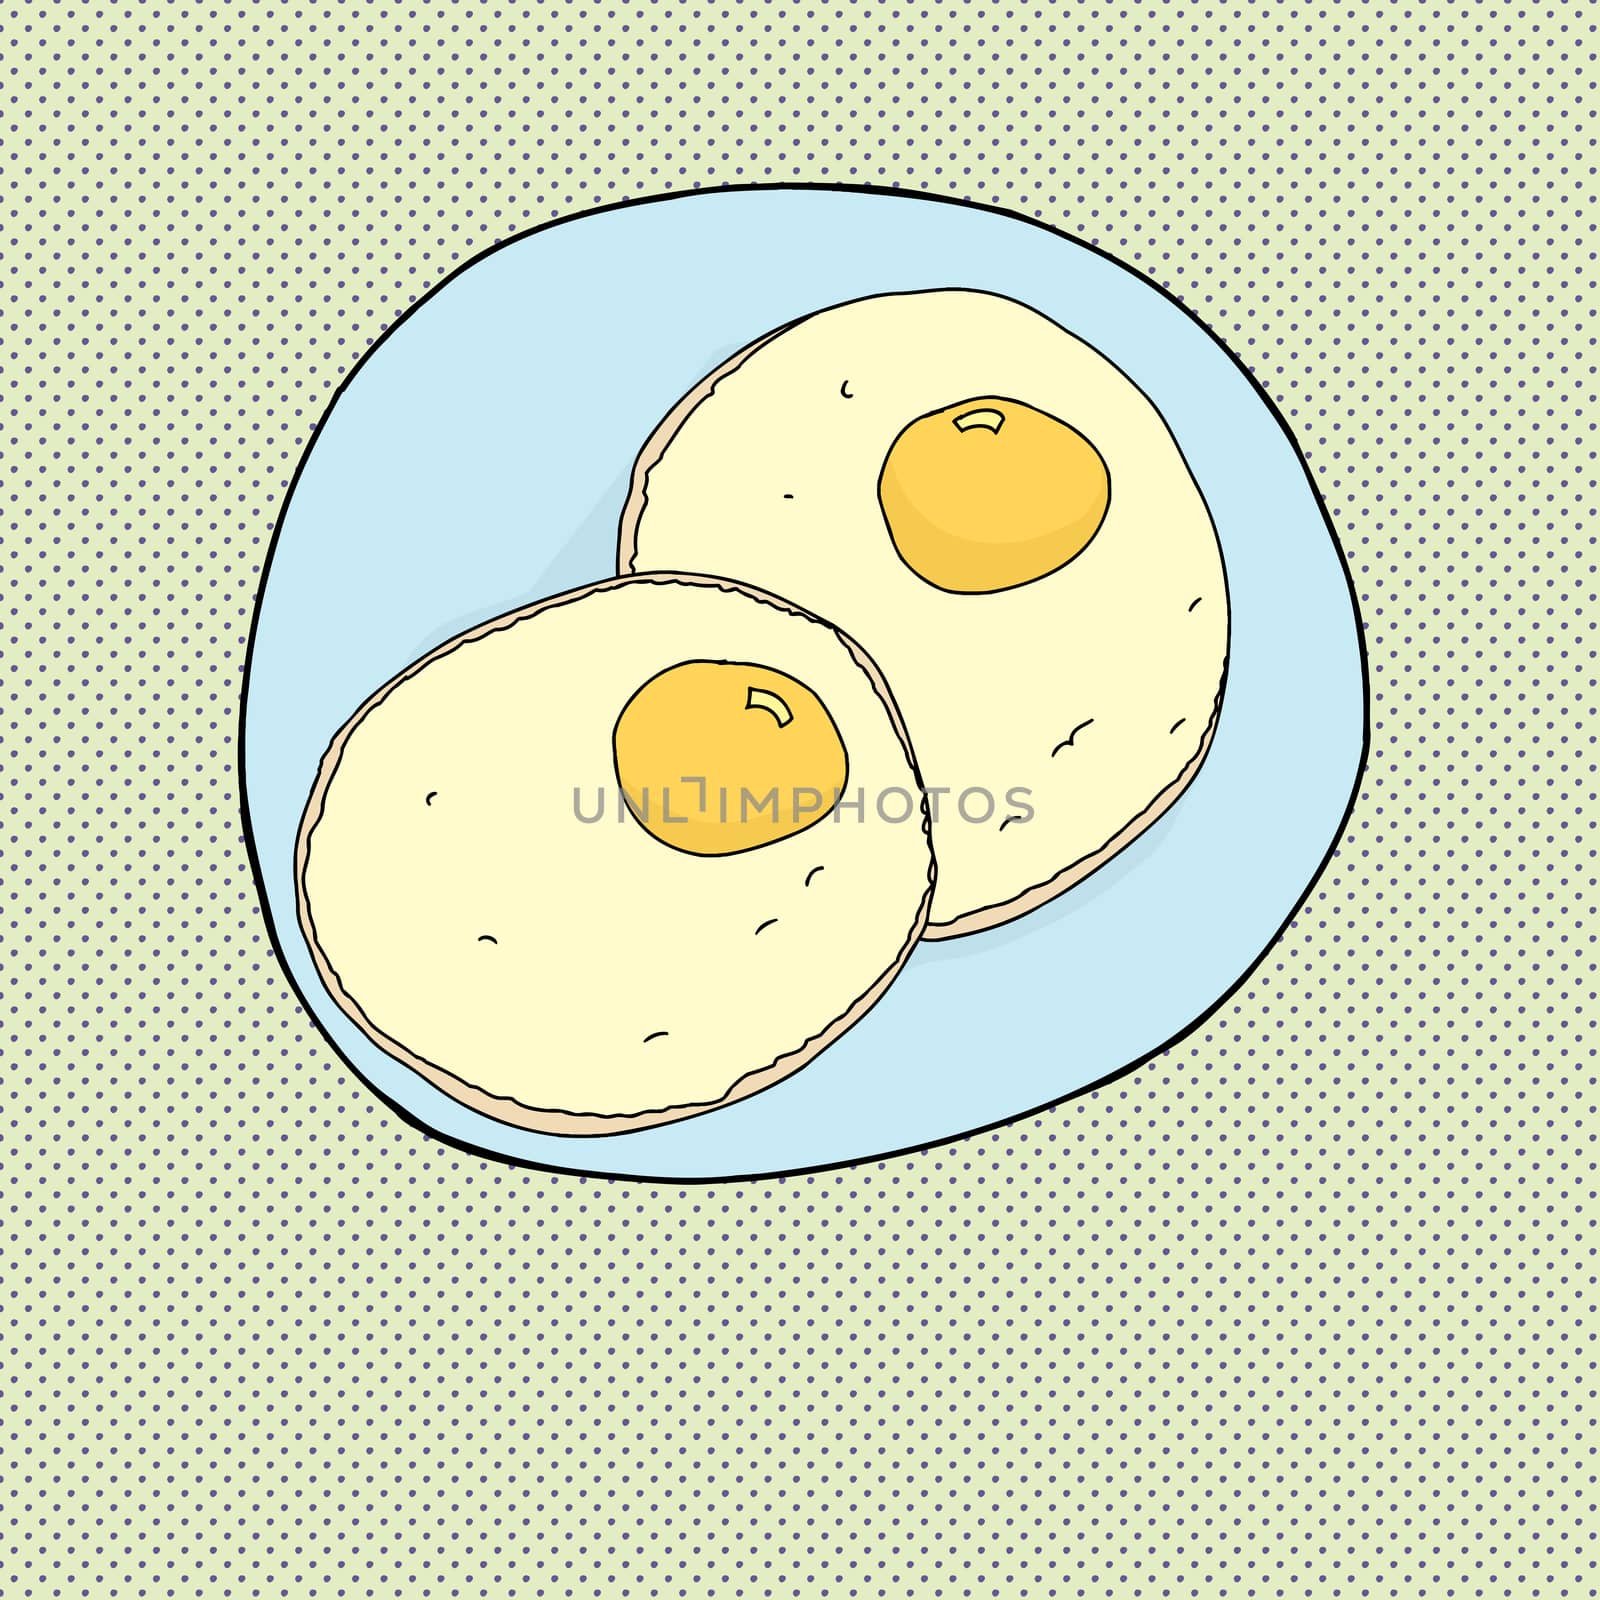 Two fried eggs on blue plate over halftone background